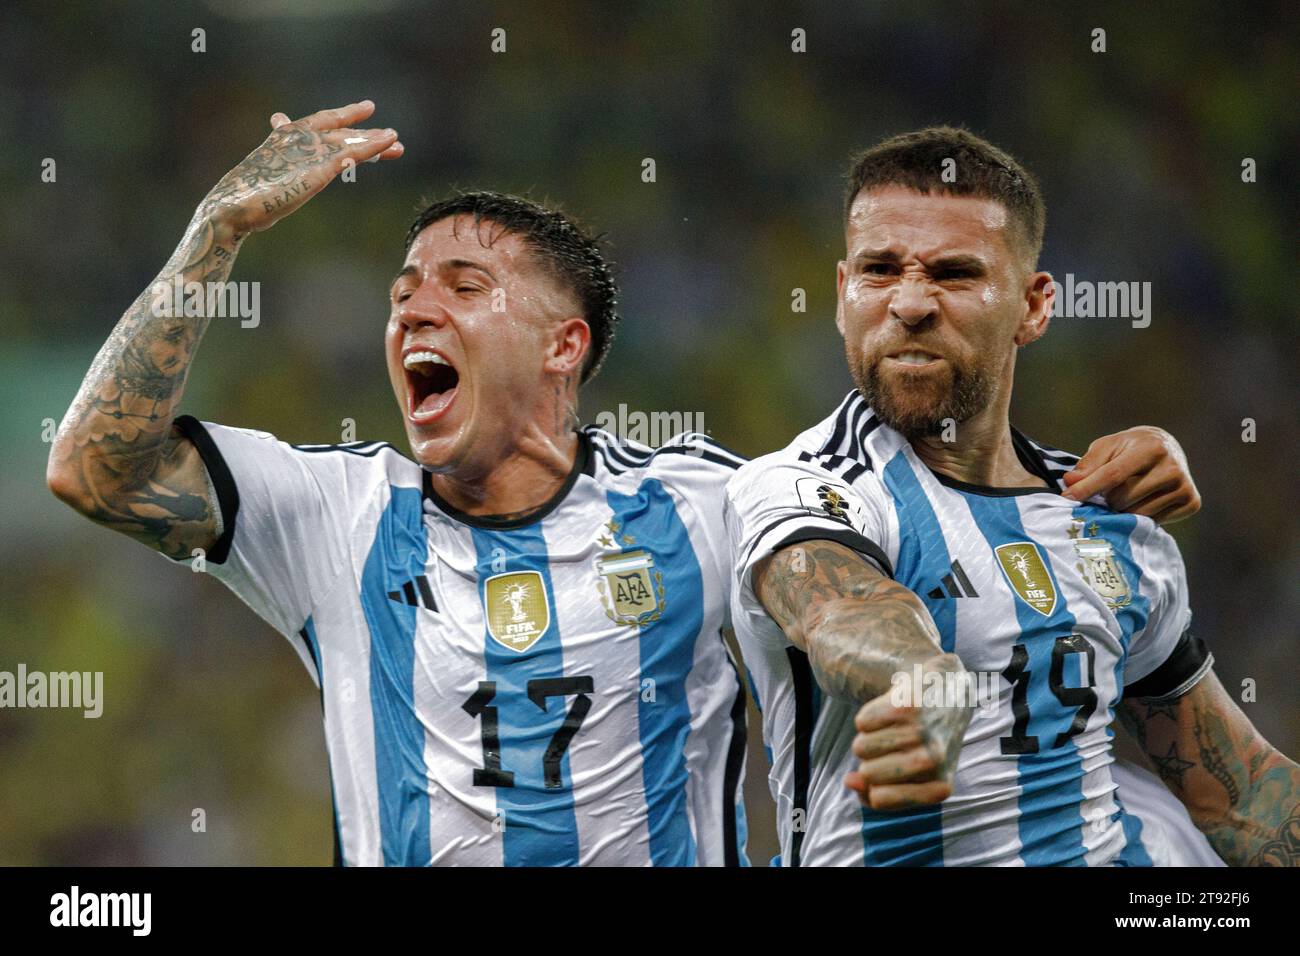 Rio De Janeiro, Brazil. 21st Nov, 2023. Nicolas Otamendi (R) and Enzo Fernandez of Argentina celebrate a goal during the 2026 World Cup qualifier match between Brazil and Argentina at the Maracana stadium in Rio de Janeiro, Brazil, on Nov. 21, 2023. Credit: Claudia Martini/Xinhua/Alamy Live News Stock Photo